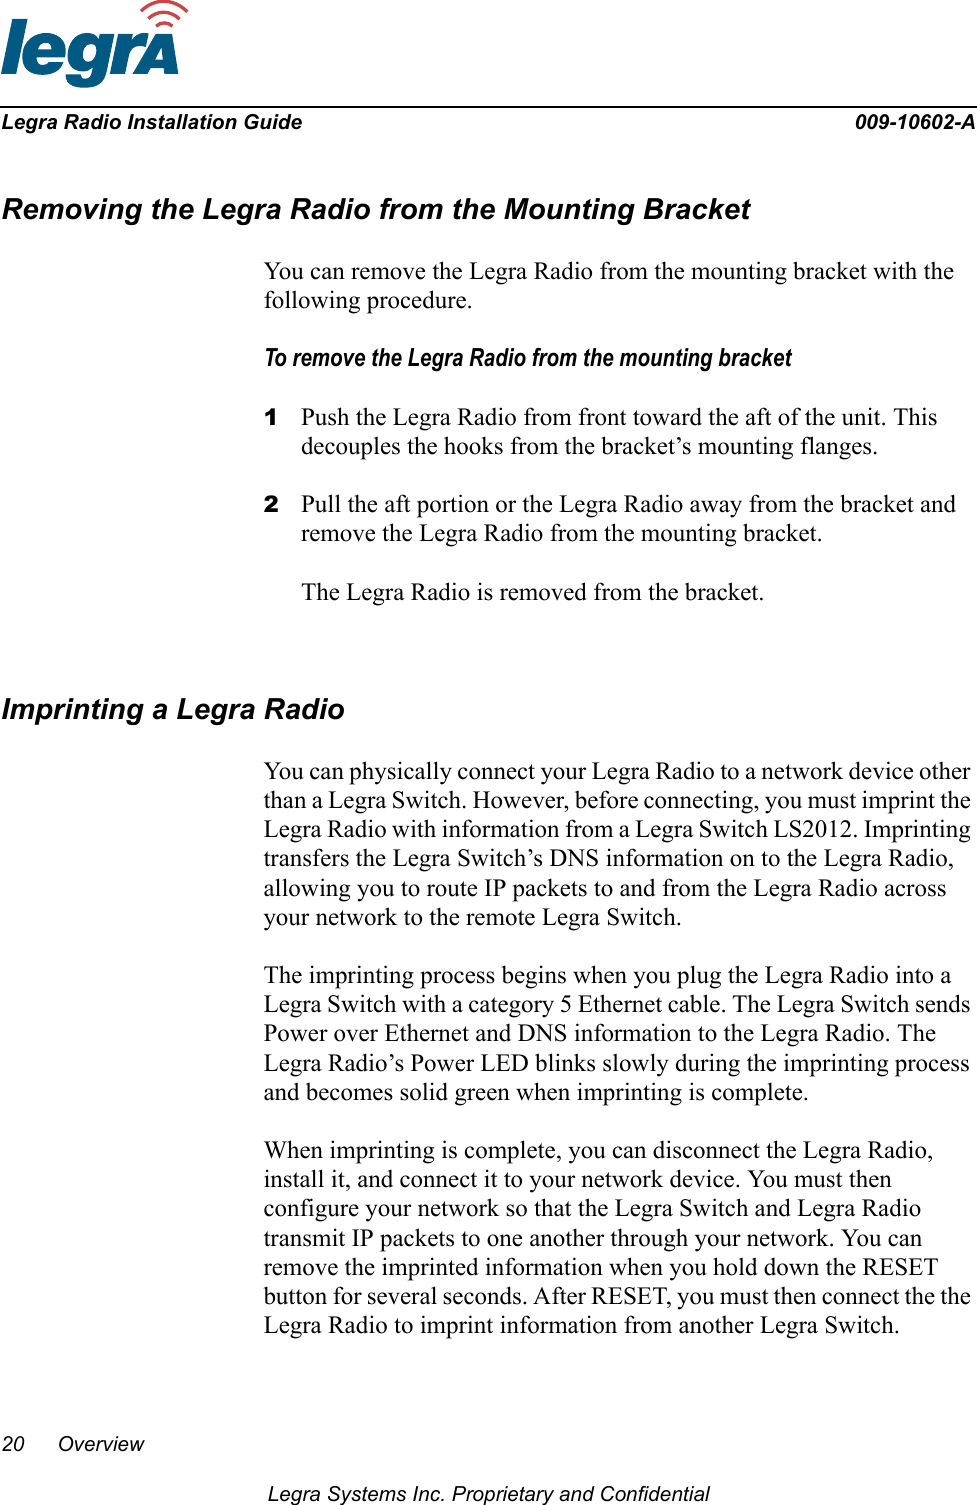 20 OverviewLegra Systems Inc. Proprietary and ConfidentialLegra Radio Installation Guide 009-10602-ARemoving the Legra Radio from the Mounting BracketYou can remove the Legra Radio from the mounting bracket with the following procedure.To remove the Legra Radio from the mounting bracket1Push the Legra Radio from front toward the aft of the unit. This decouples the hooks from the bracket’s mounting flanges.2Pull the aft portion or the Legra Radio away from the bracket and remove the Legra Radio from the mounting bracket.The Legra Radio is removed from the bracket.Imprinting a Legra RadioYou can physically connect your Legra Radio to a network device other than a Legra Switch. However, before connecting, you must imprint the Legra Radio with information from a Legra Switch LS2012. Imprinting transfers the Legra Switch’s DNS information on to the Legra Radio, allowing you to route IP packets to and from the Legra Radio across your network to the remote Legra Switch. The imprinting process begins when you plug the Legra Radio into a Legra Switch with a category 5 Ethernet cable. The Legra Switch sends Power over Ethernet and DNS information to the Legra Radio. The Legra Radio’s Power LED blinks slowly during the imprinting process and becomes solid green when imprinting is complete. When imprinting is complete, you can disconnect the Legra Radio, install it, and connect it to your network device. You must then configure your network so that the Legra Switch and Legra Radio transmit IP packets to one another through your network. You can remove the imprinted information when you hold down the RESET button for several seconds. After RESET, you must then connect the the Legra Radio to imprint information from another Legra Switch.